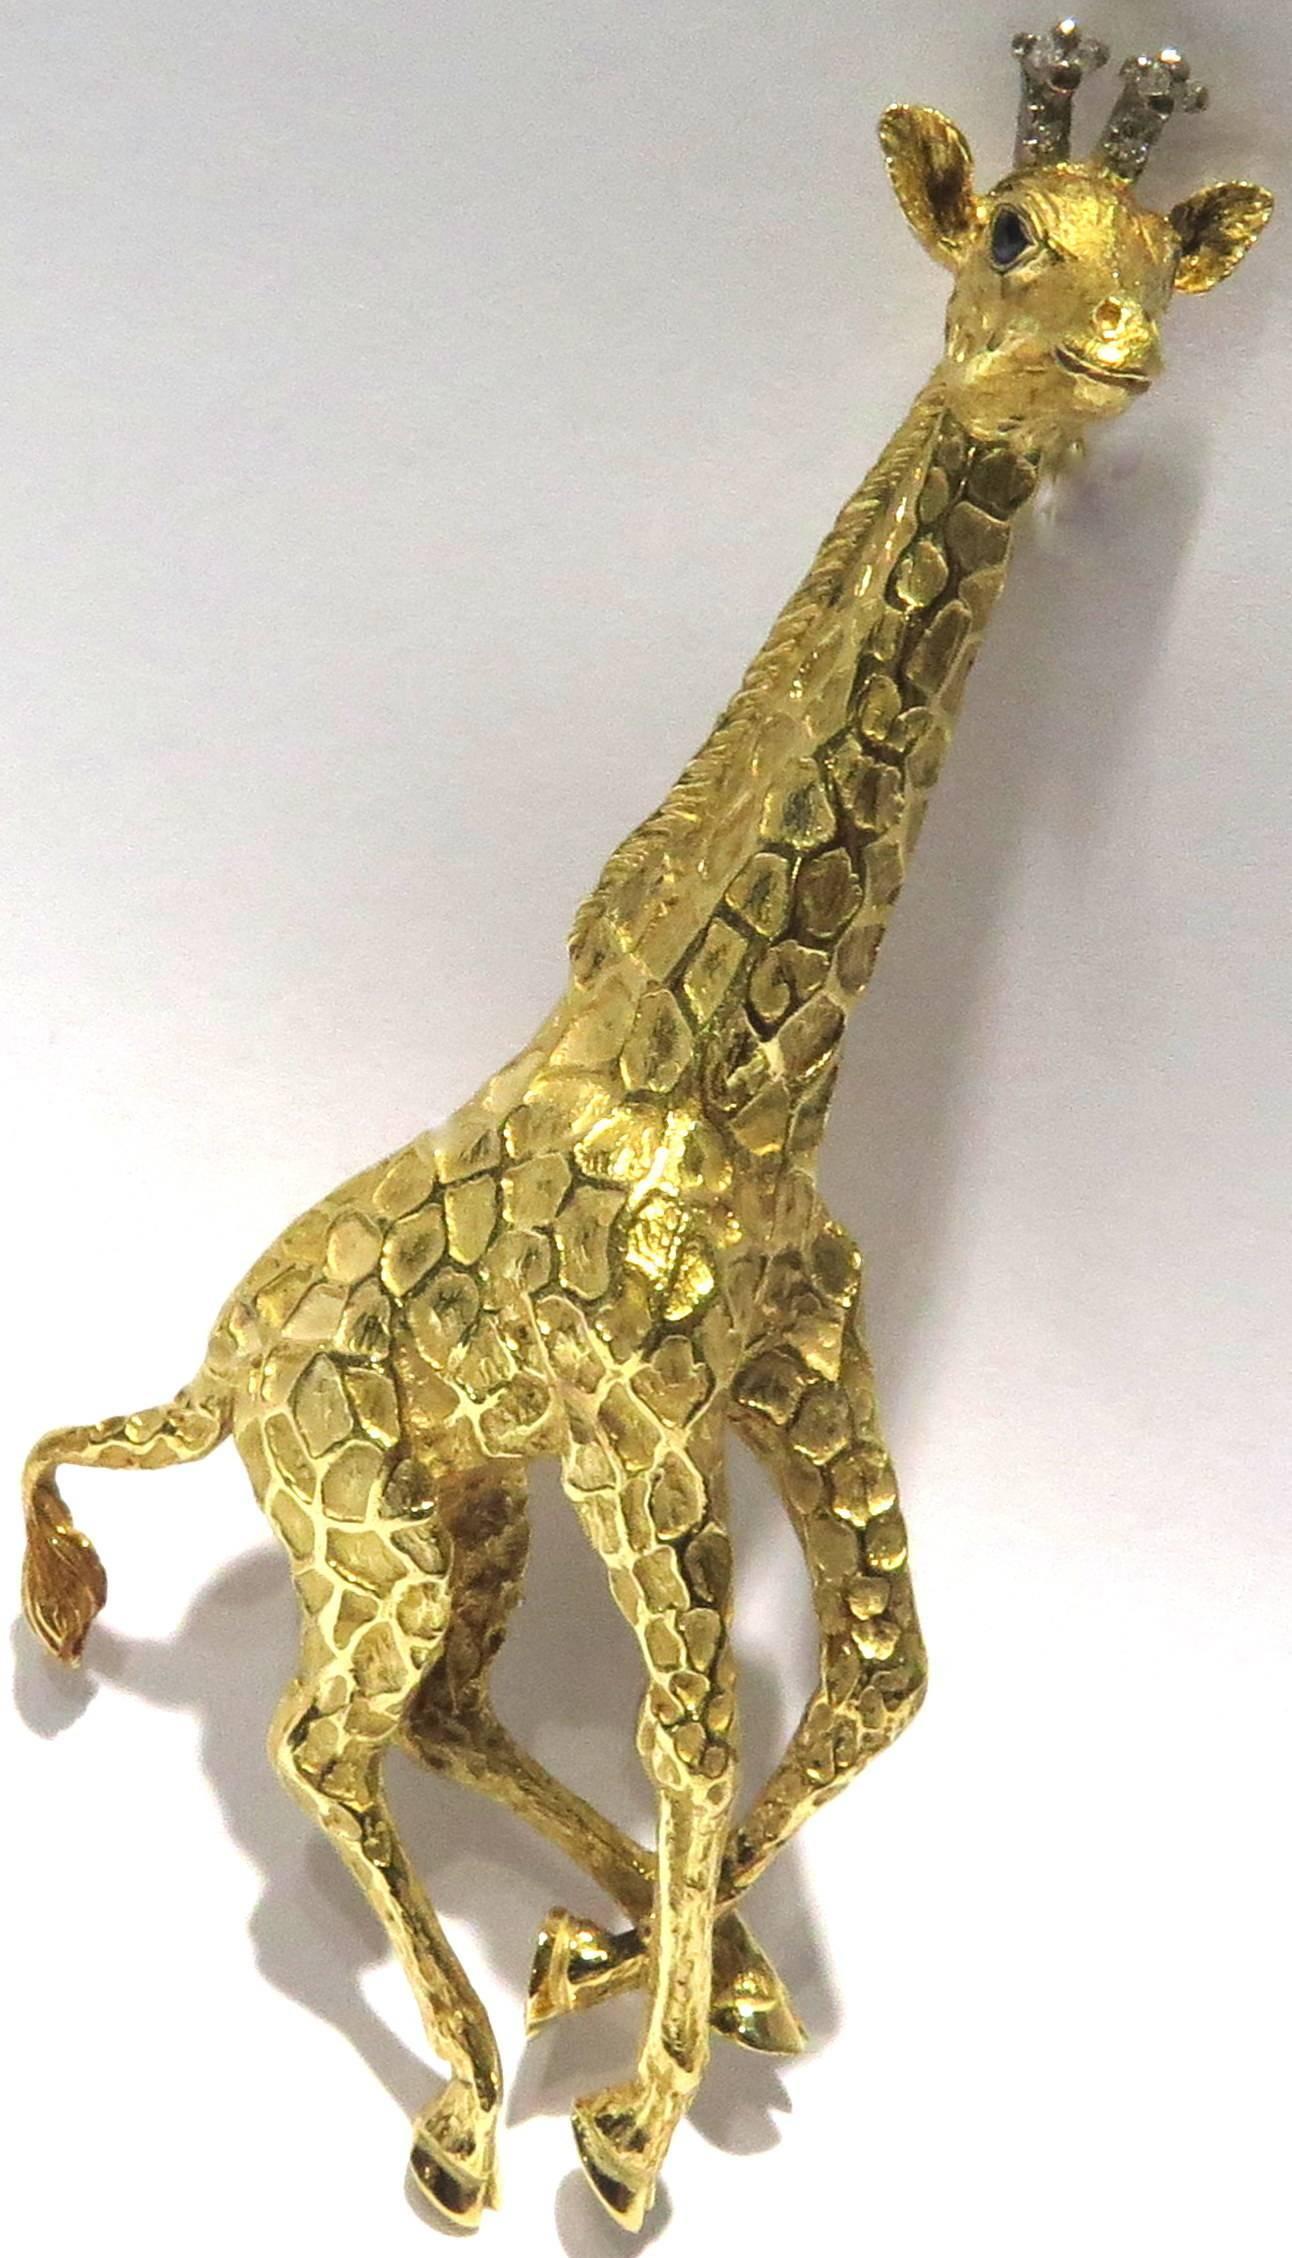 This playful giraffe by Tiffany and Company has the cutest little diamond ossicones around, and his texture is so realistic. He looks just like his relatives in the Serengeti. He has 2 sapphire eyes and 8 diamonds for his ossicones. 
This Tiffany